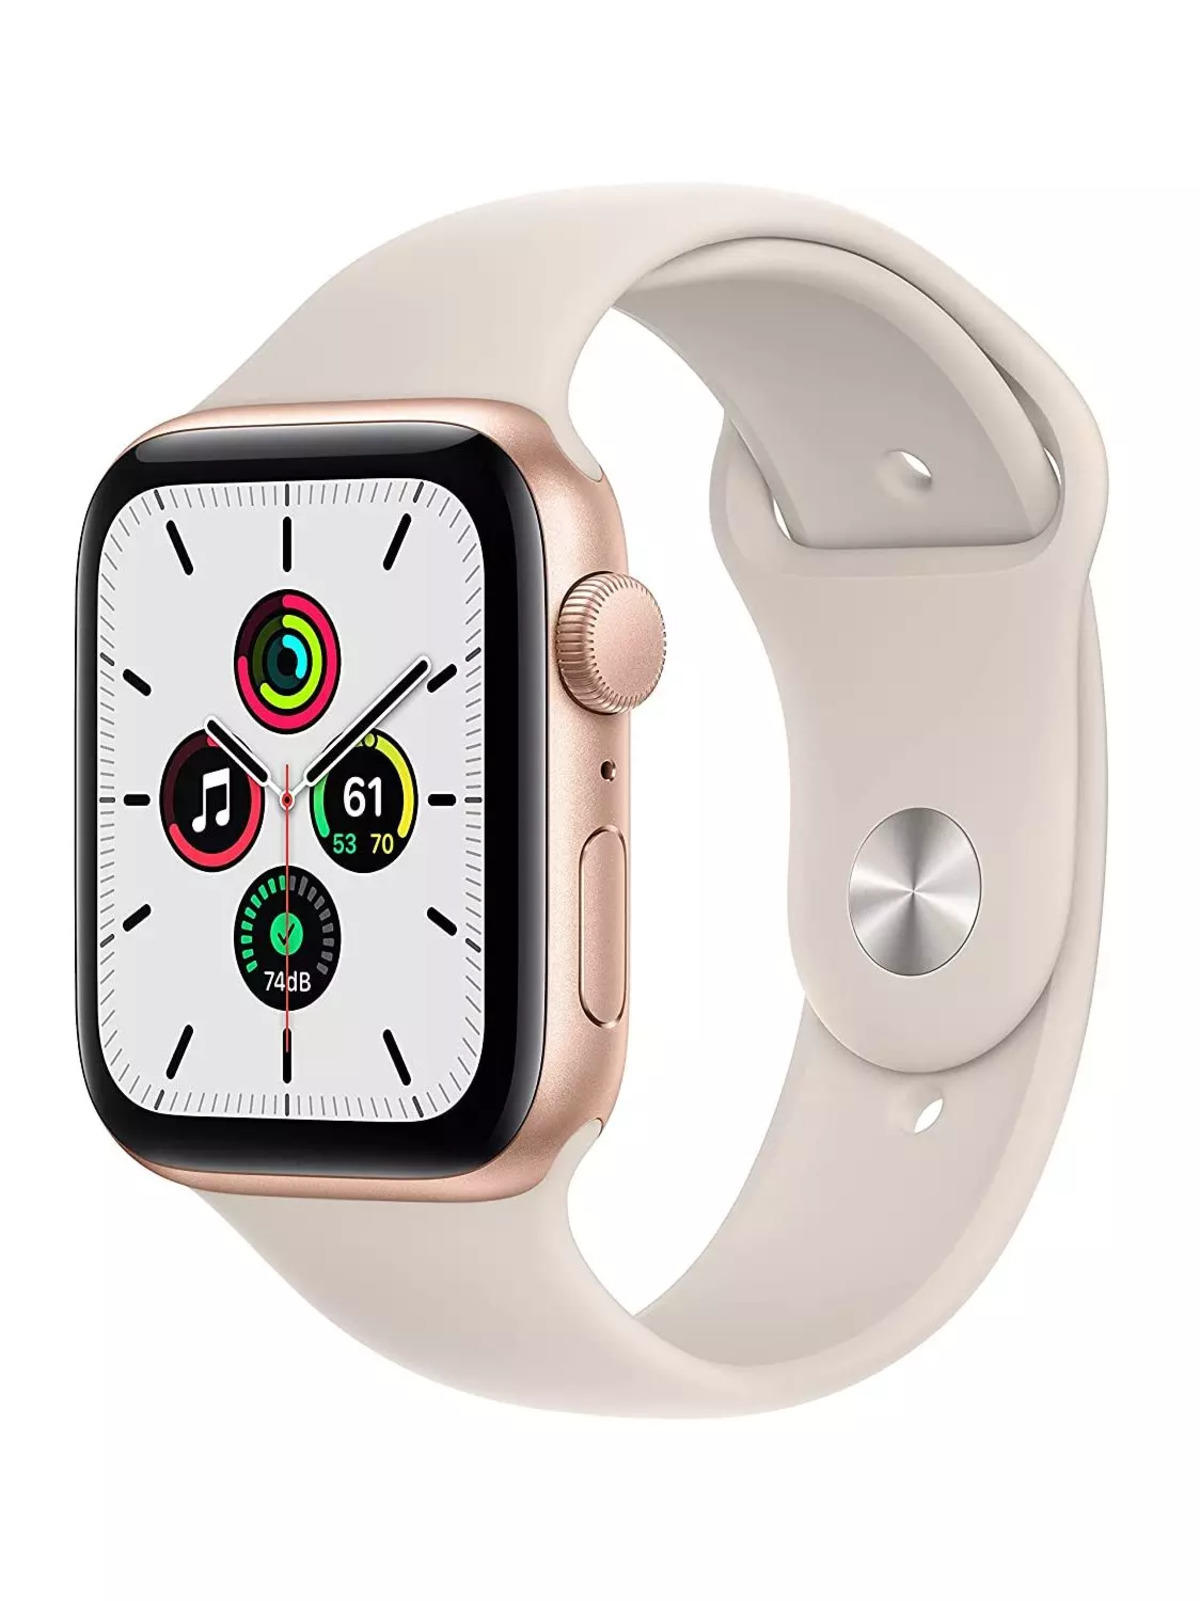 APPLE WATCH SE 2: WITH NEW FEATURES